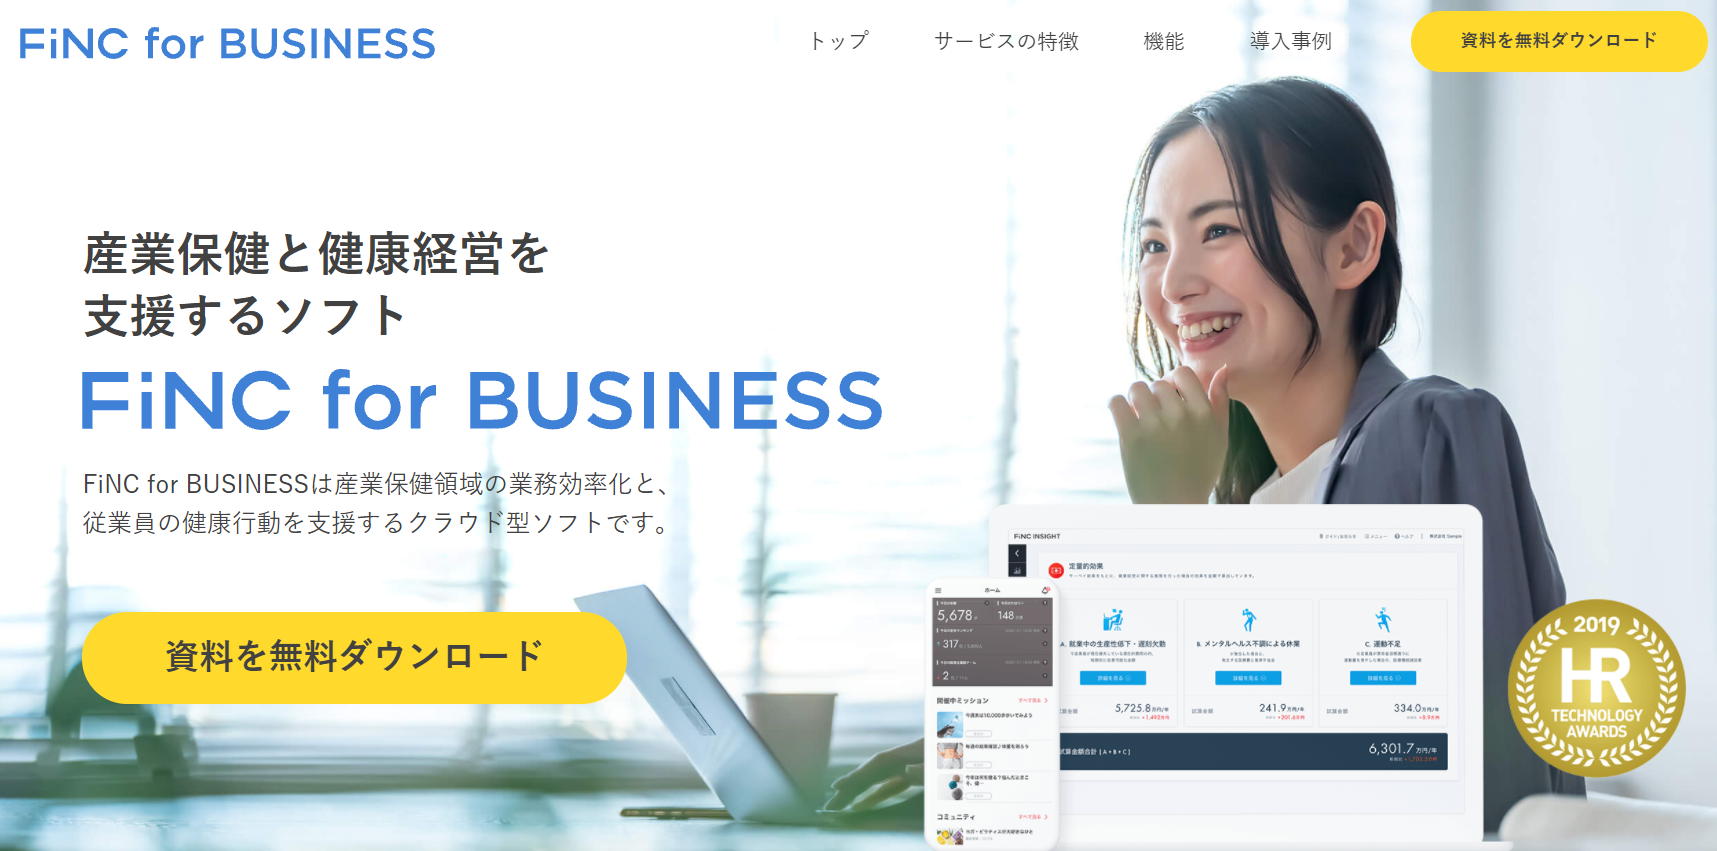 FiNC for BUSINESS公式Webサイト